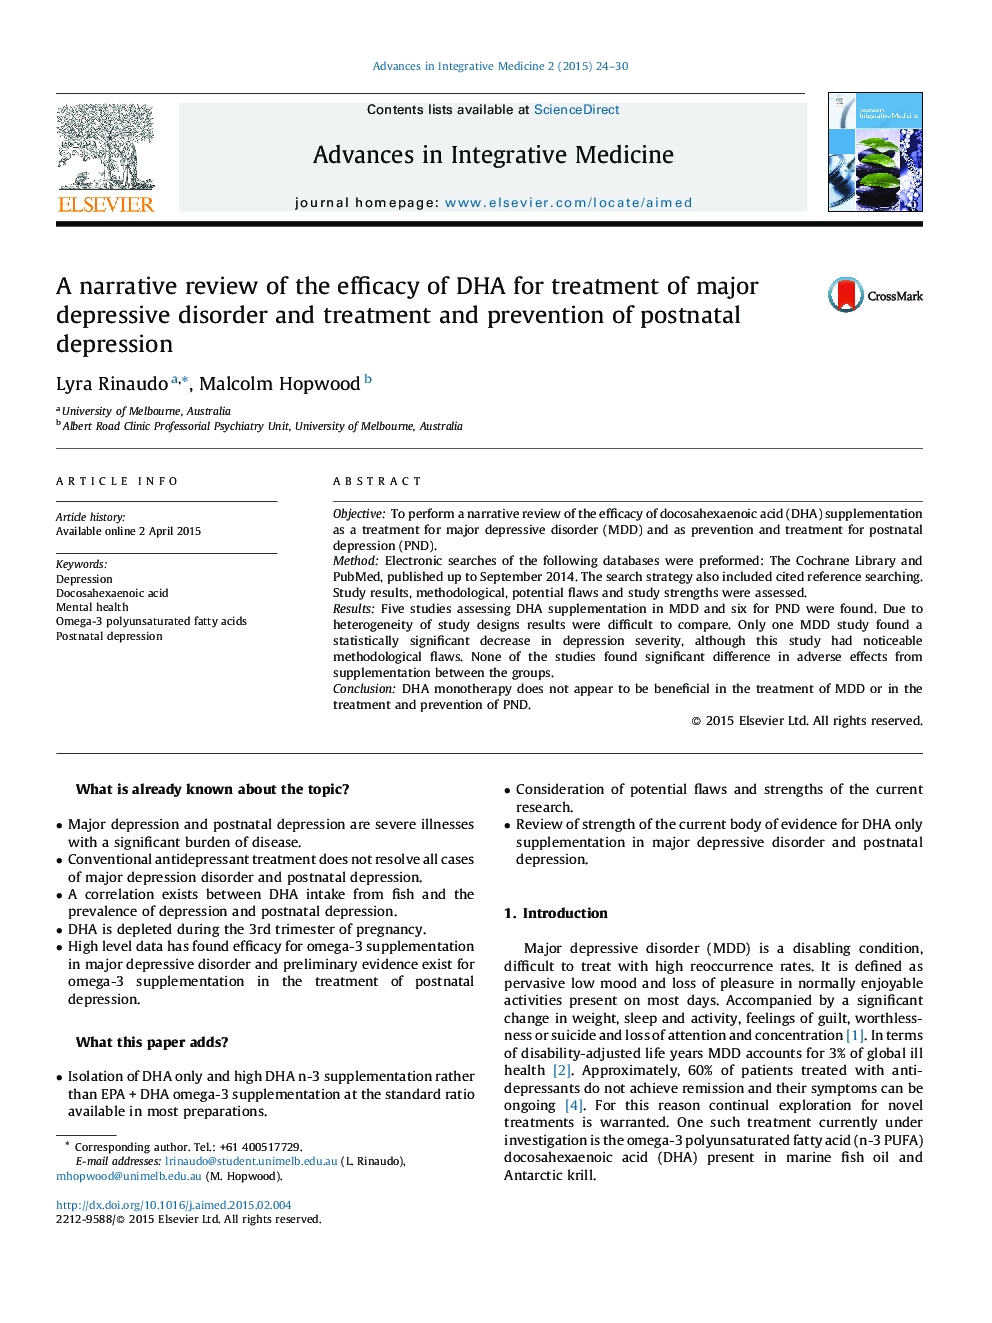 A narrative review of the efficacy of DHA for treatment of major depressive disorder and treatment and prevention of postnatal depression